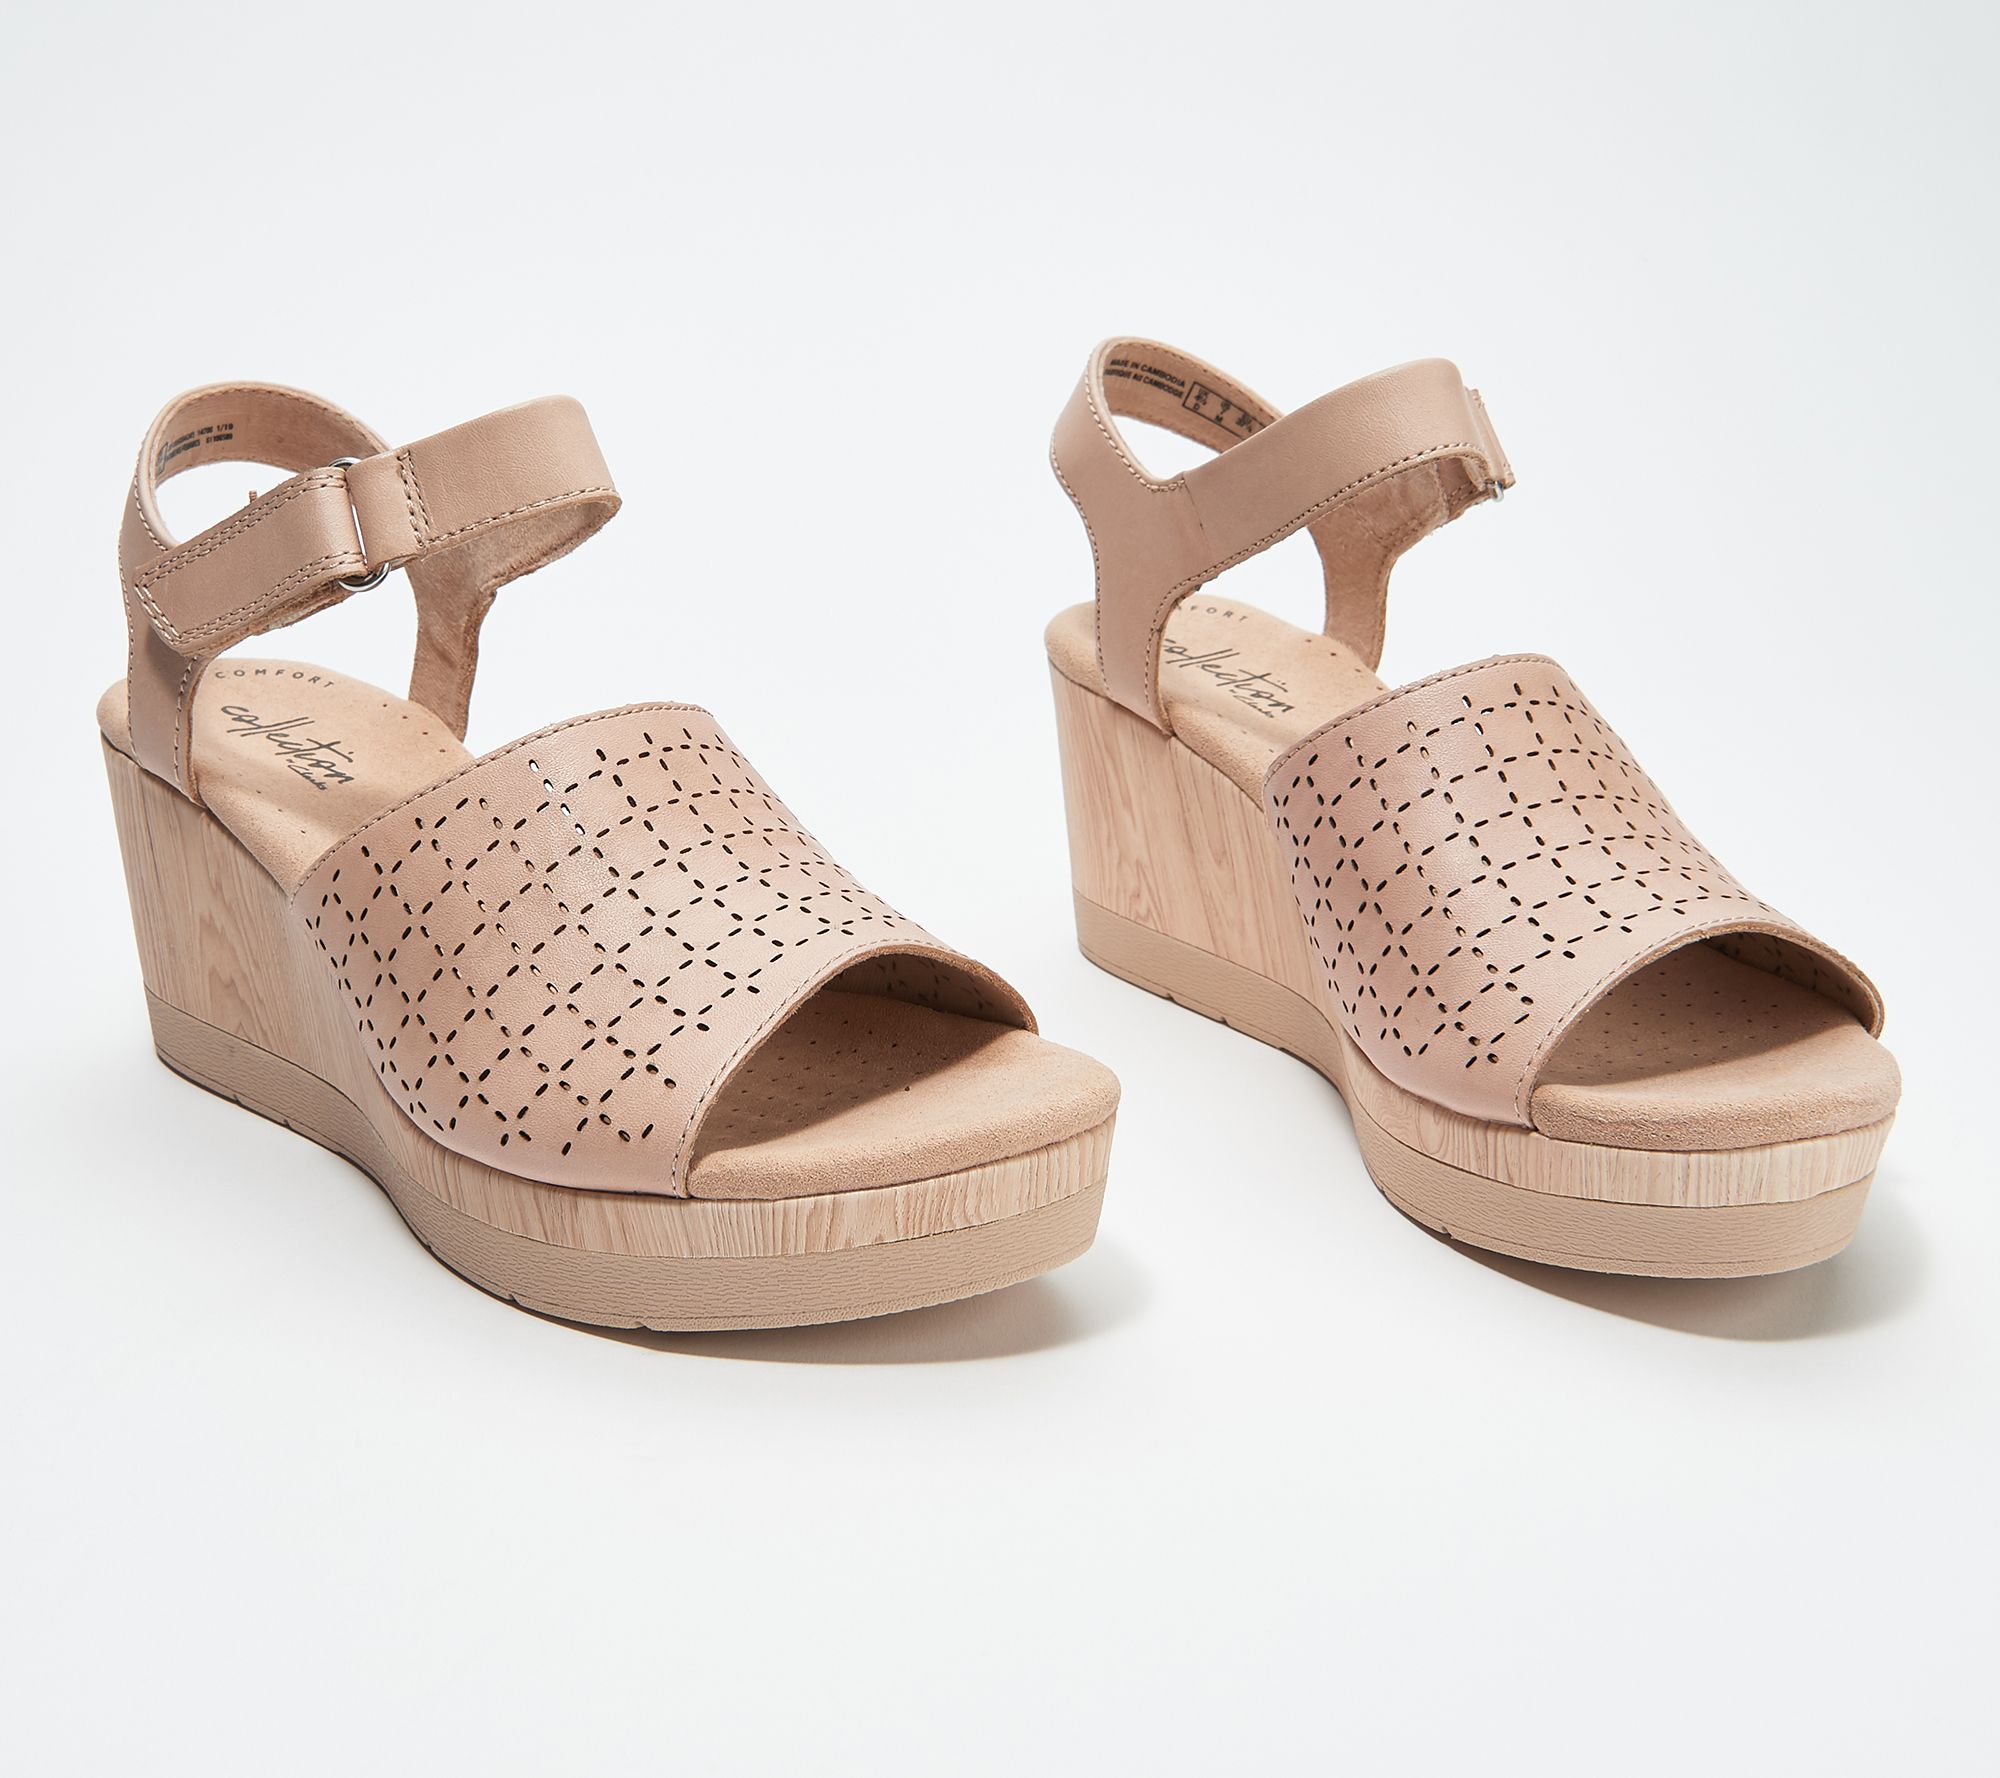 clarks perforated leather espadrilles